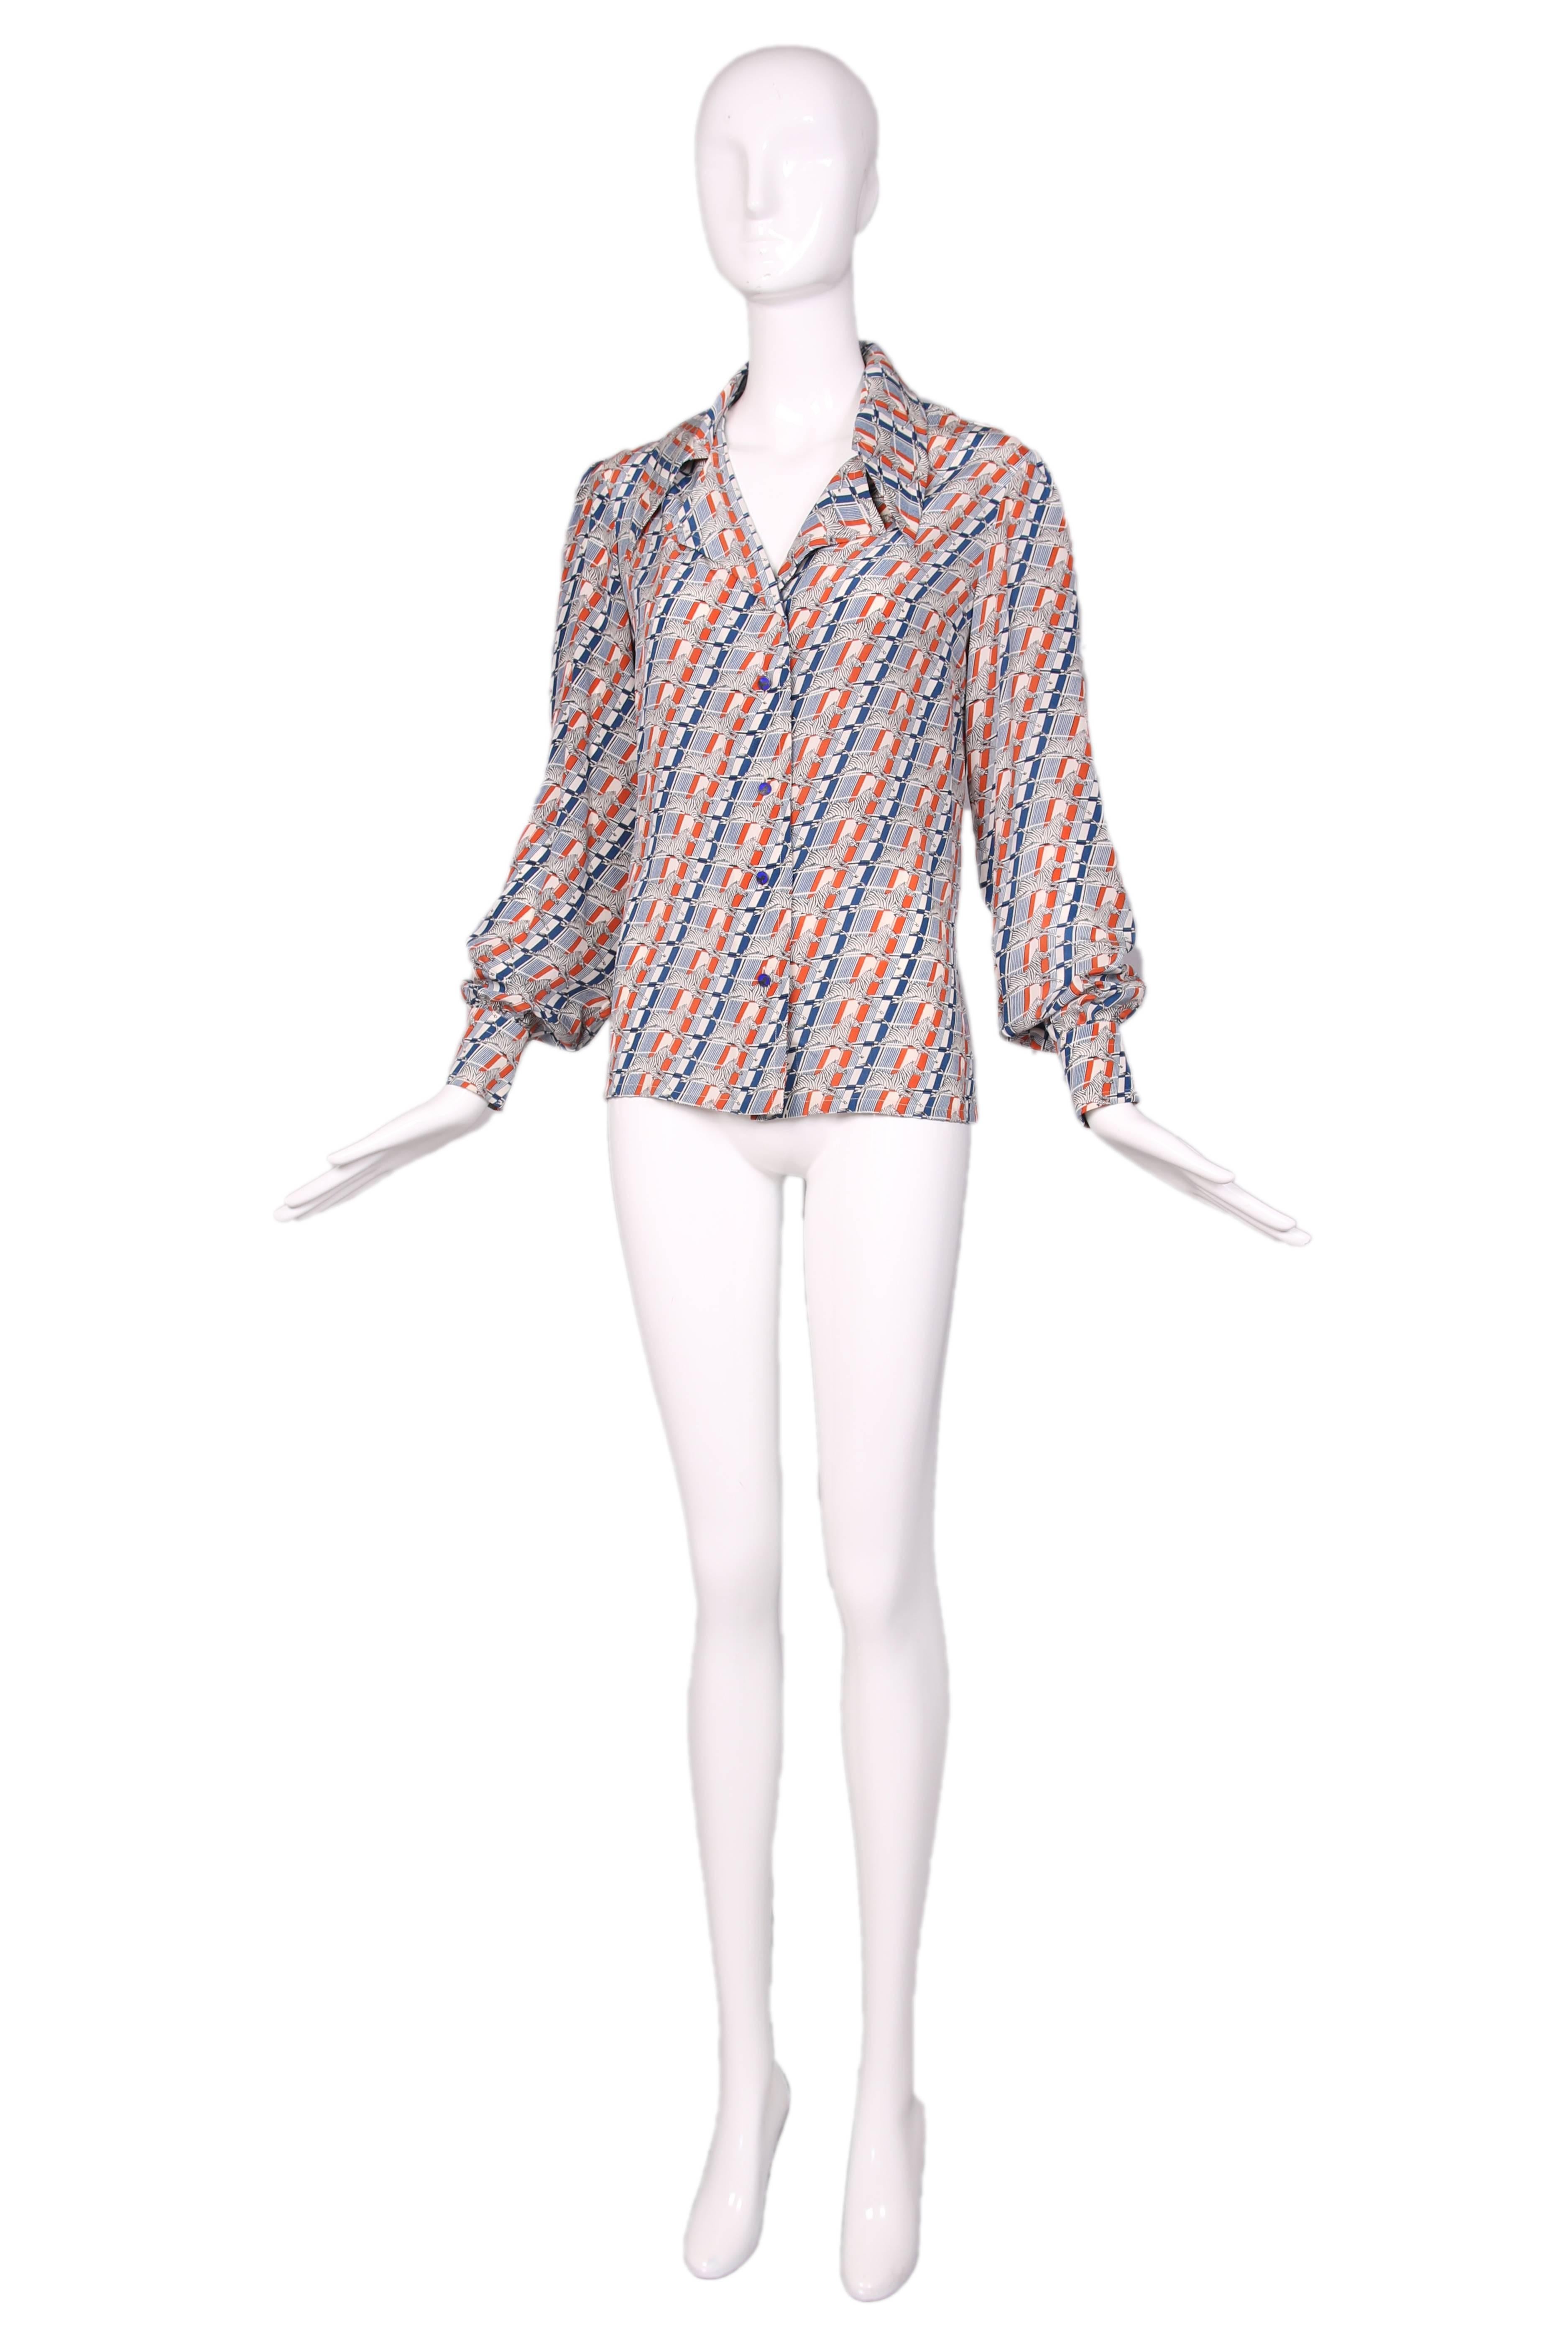 1970's Gucci blue & orange striped long sleeved silk blouse with a zebra print & matching zebra enamel buttons down the front. In excellent condition. 
MEASUREMENTS: 
Bust - 42